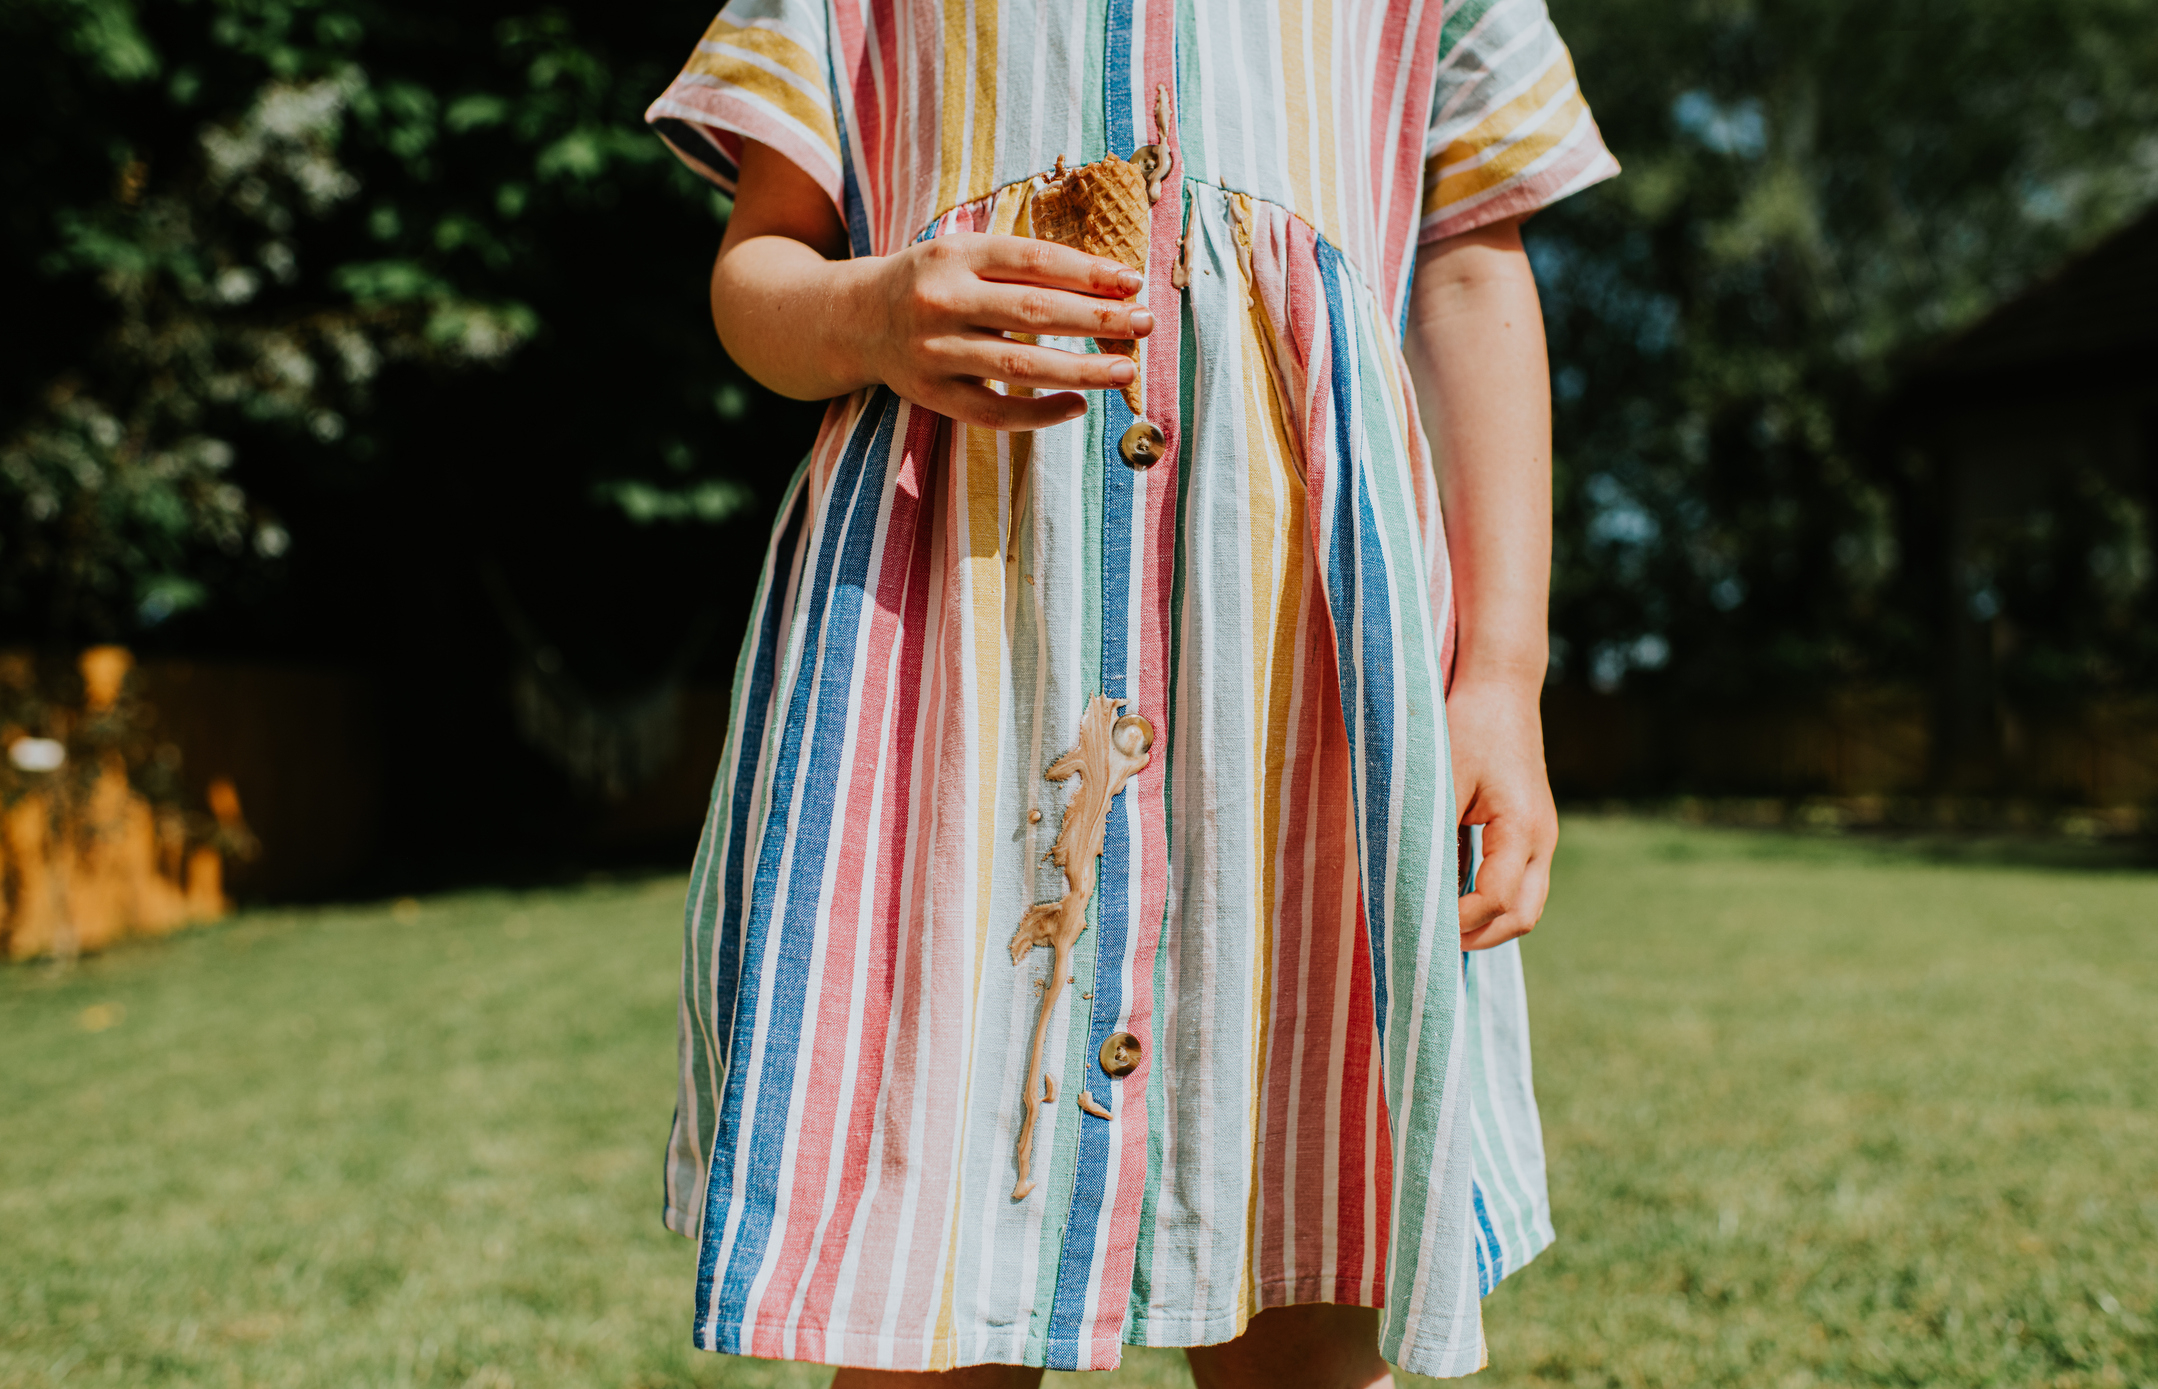 Person in a striped dress holding an ice cream cone